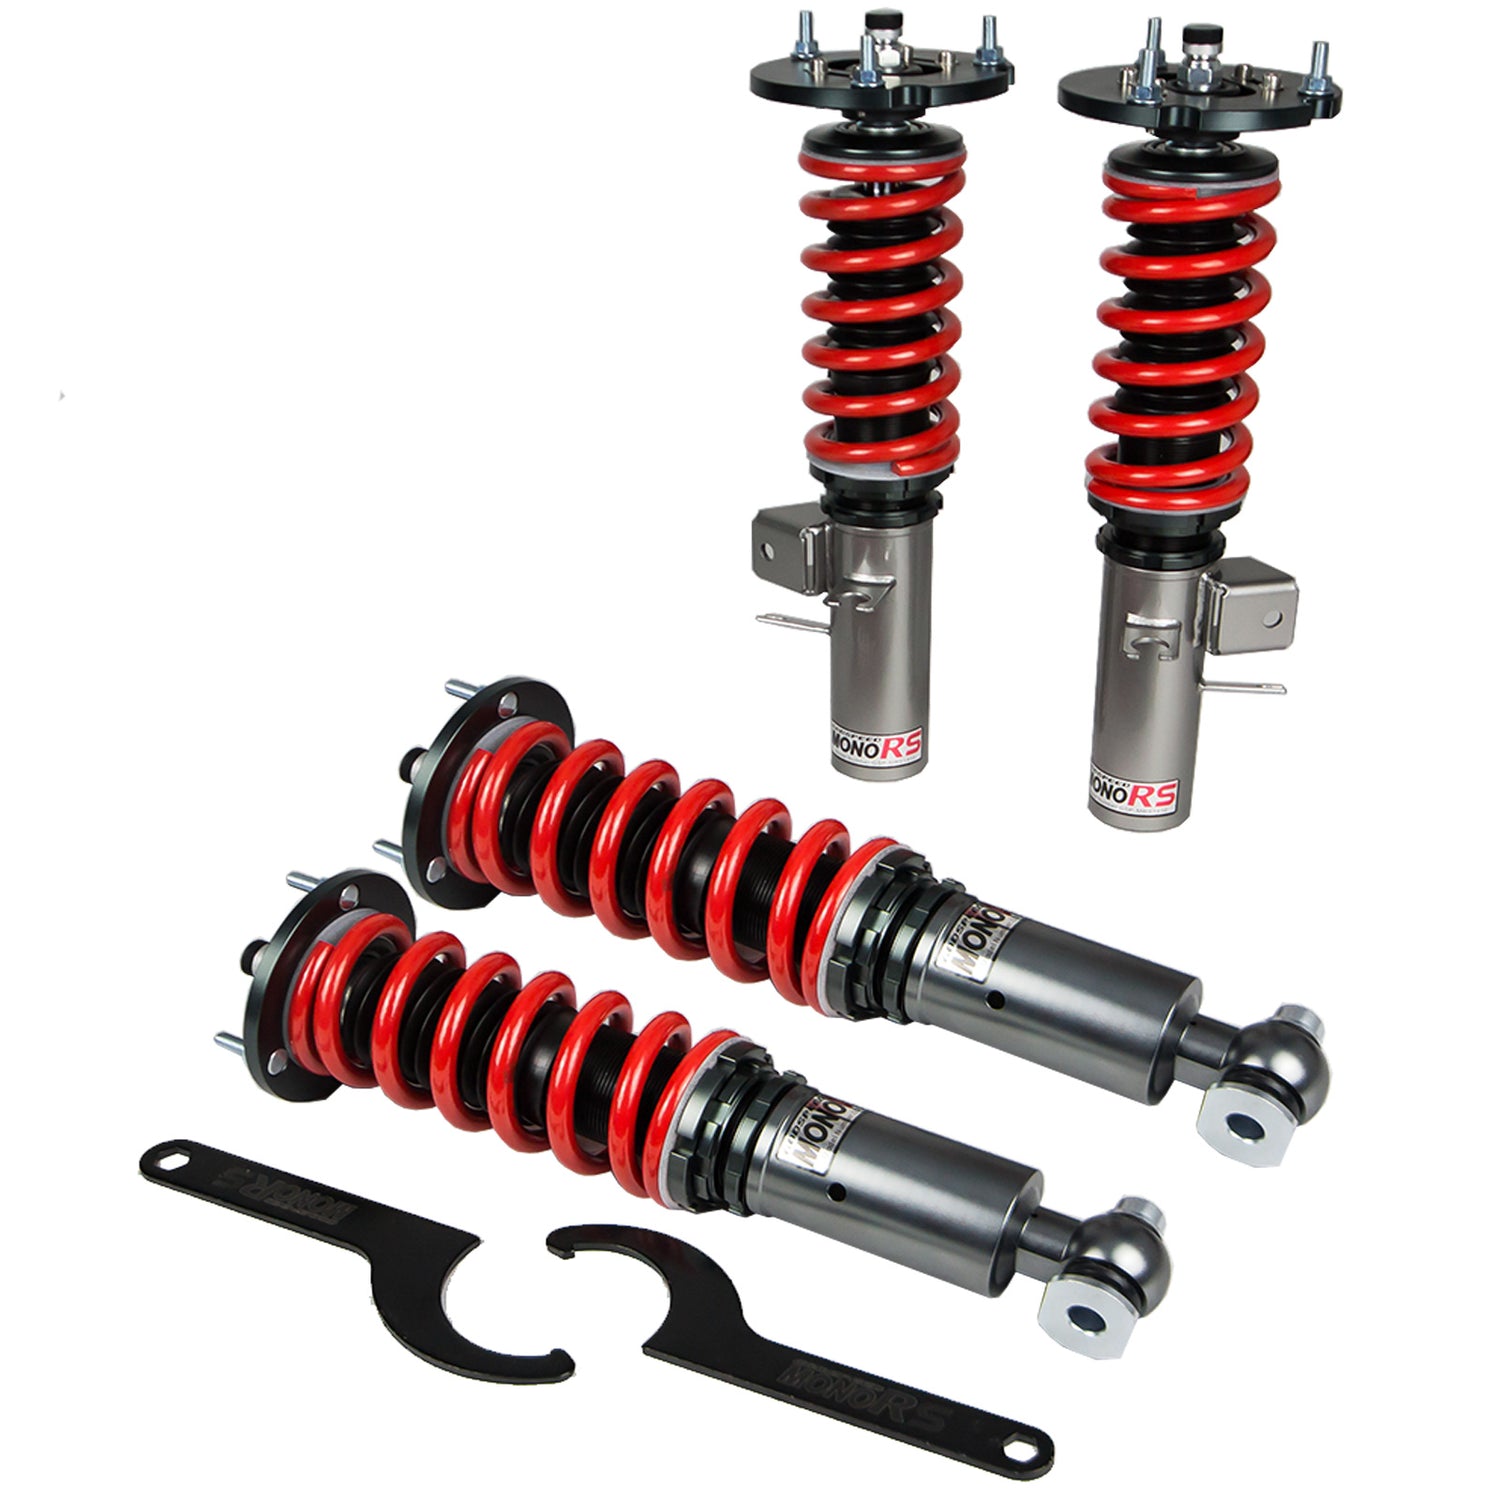 Godspeed MRS1910 MonoRS Coilover Lowering Kit, 32 Damping Adjustment, Ride Height Adjustable